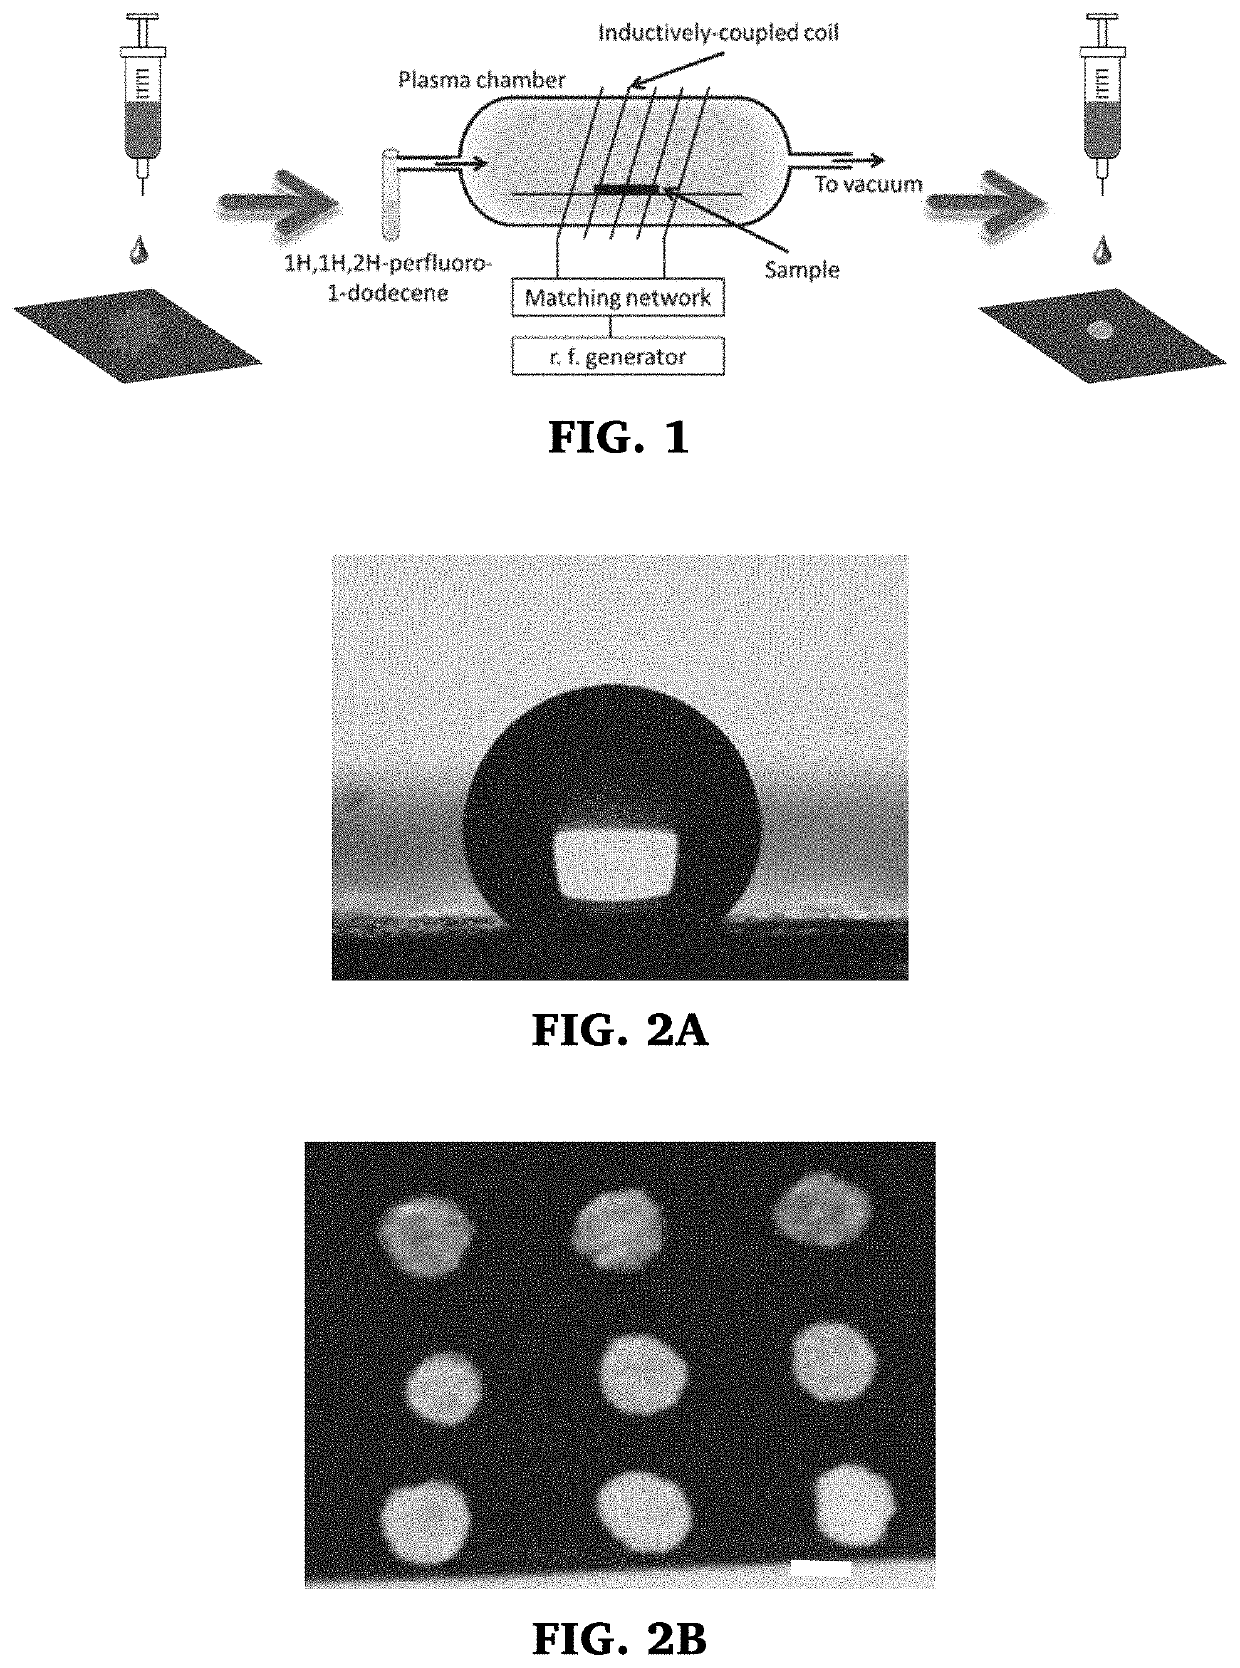 Production of a wide gamut of structural colors using binary mixtures of particles with a potential application in ink jet printing